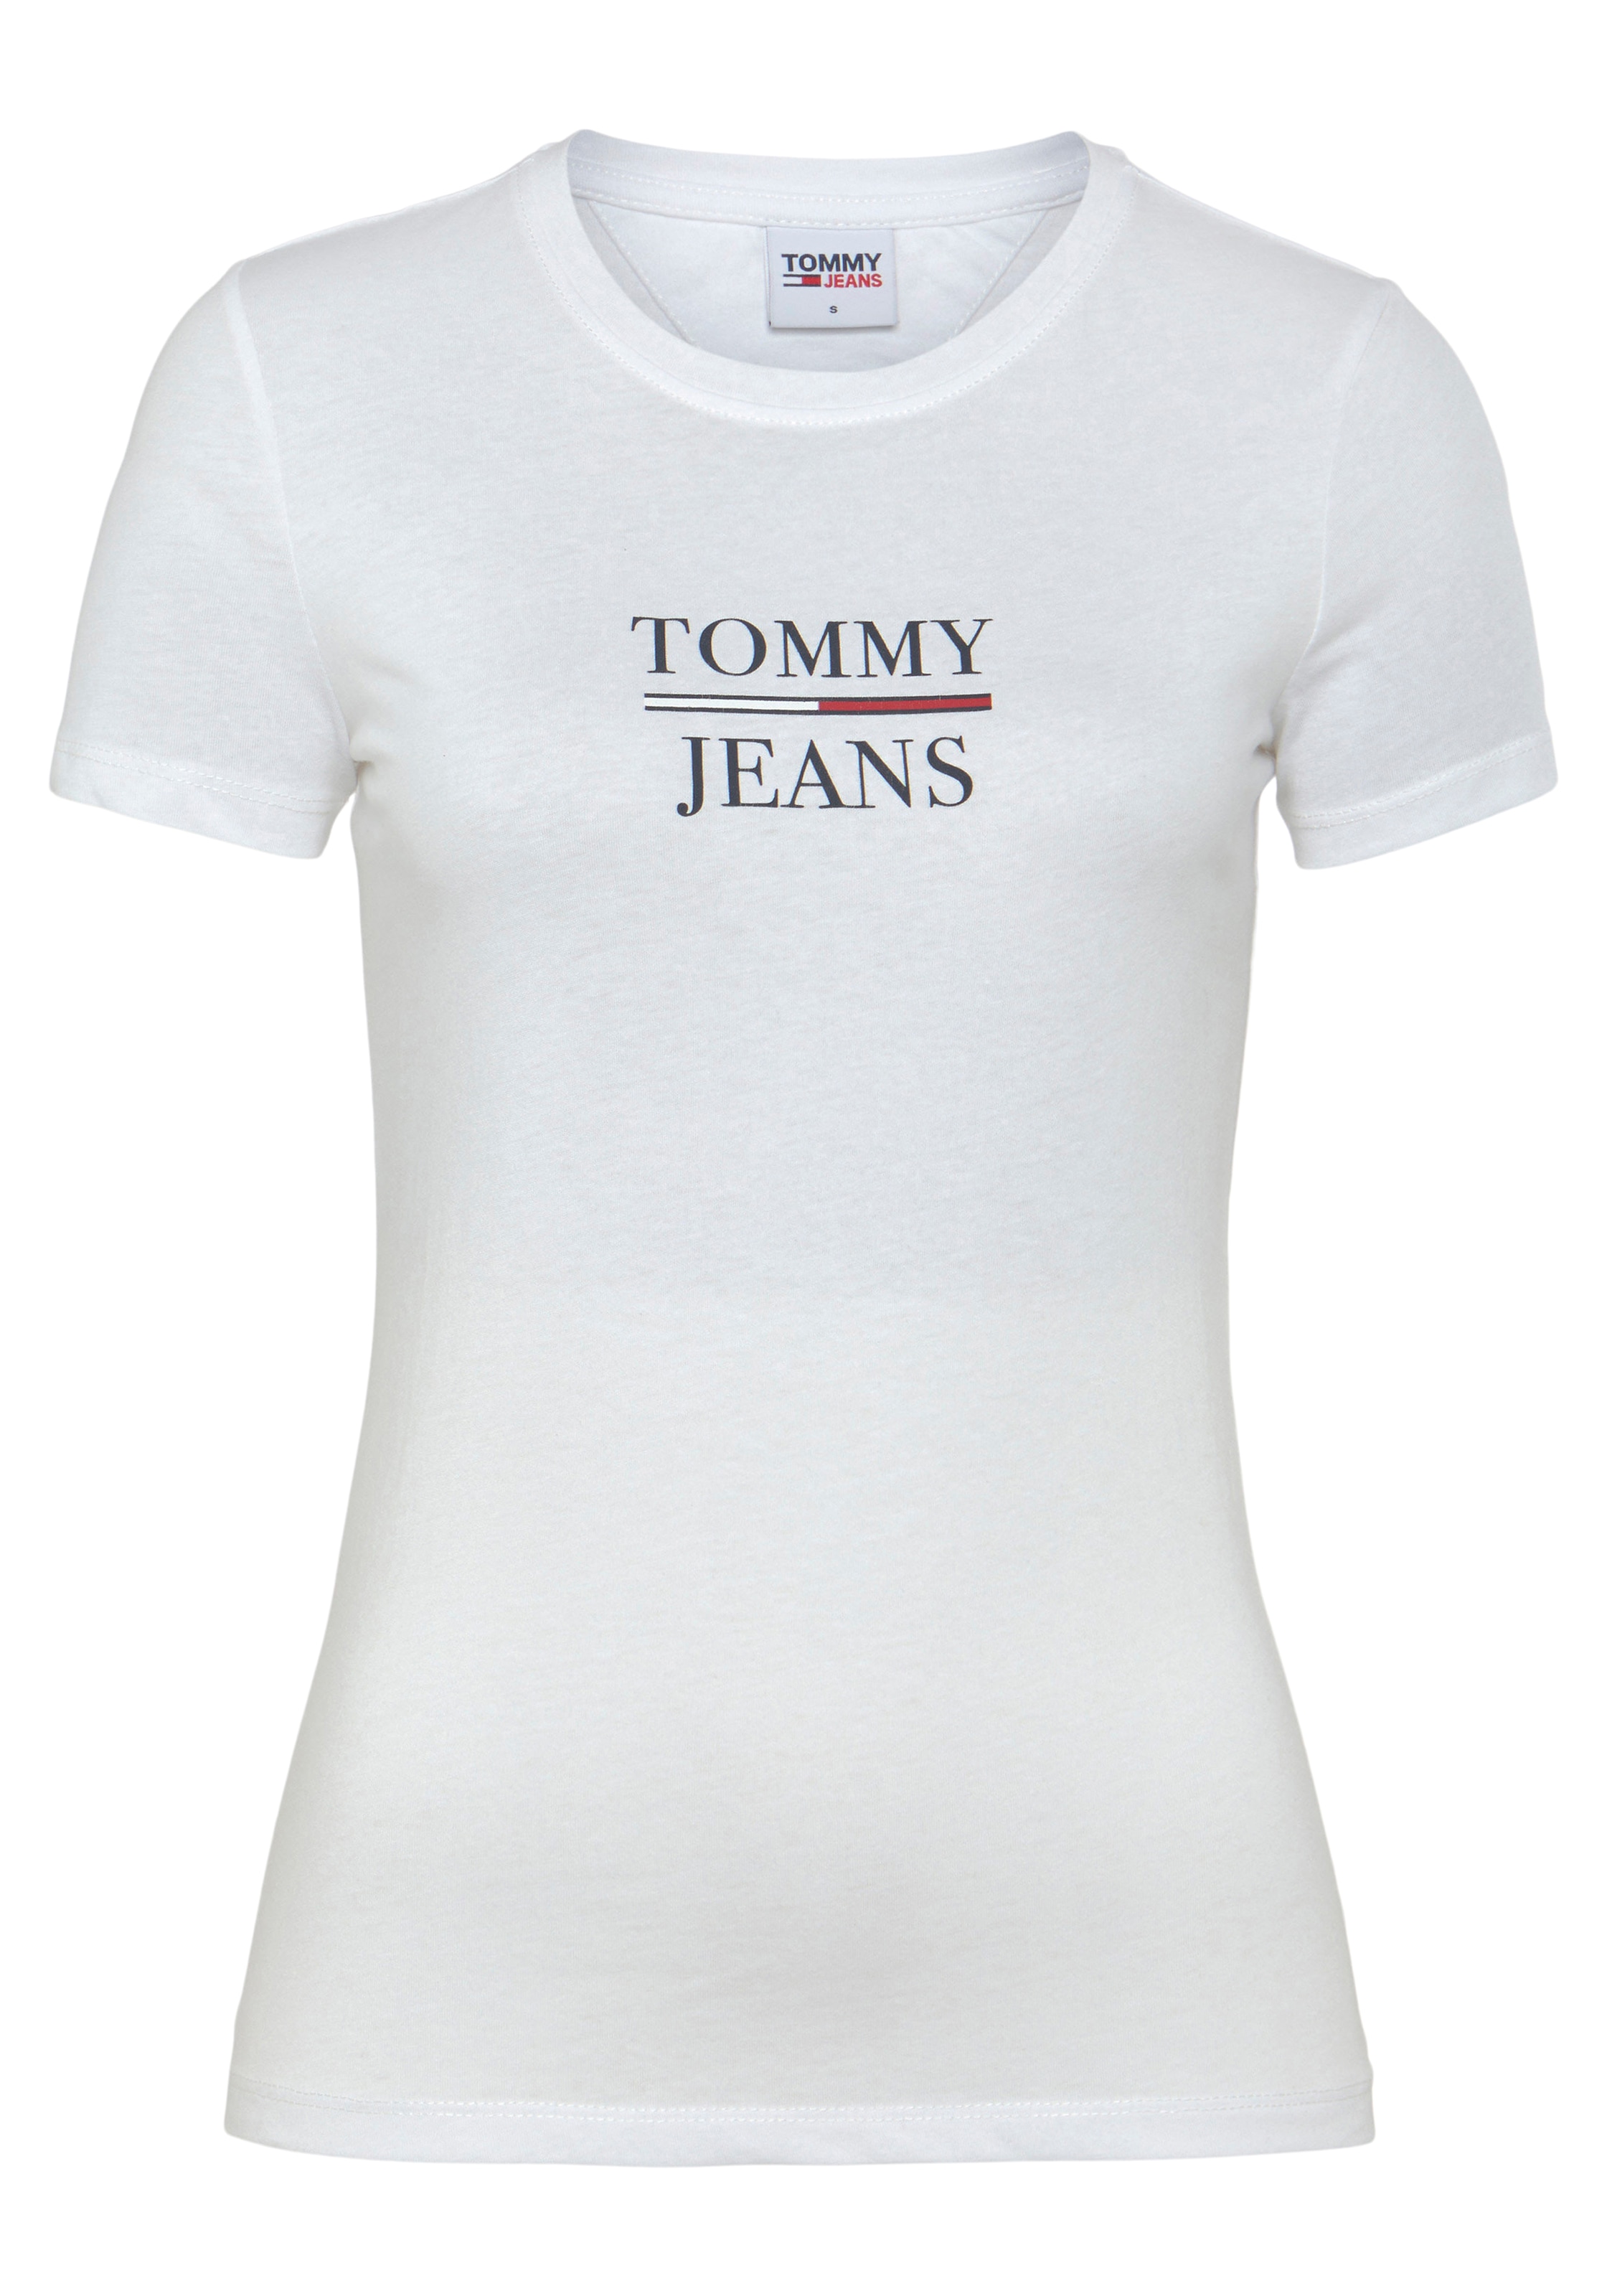 2PACK ♕ T-Shirt 2er-Pack) ESS Jeans T (Packung, TOMMY bei SS«, »TJW Tommy Skinny